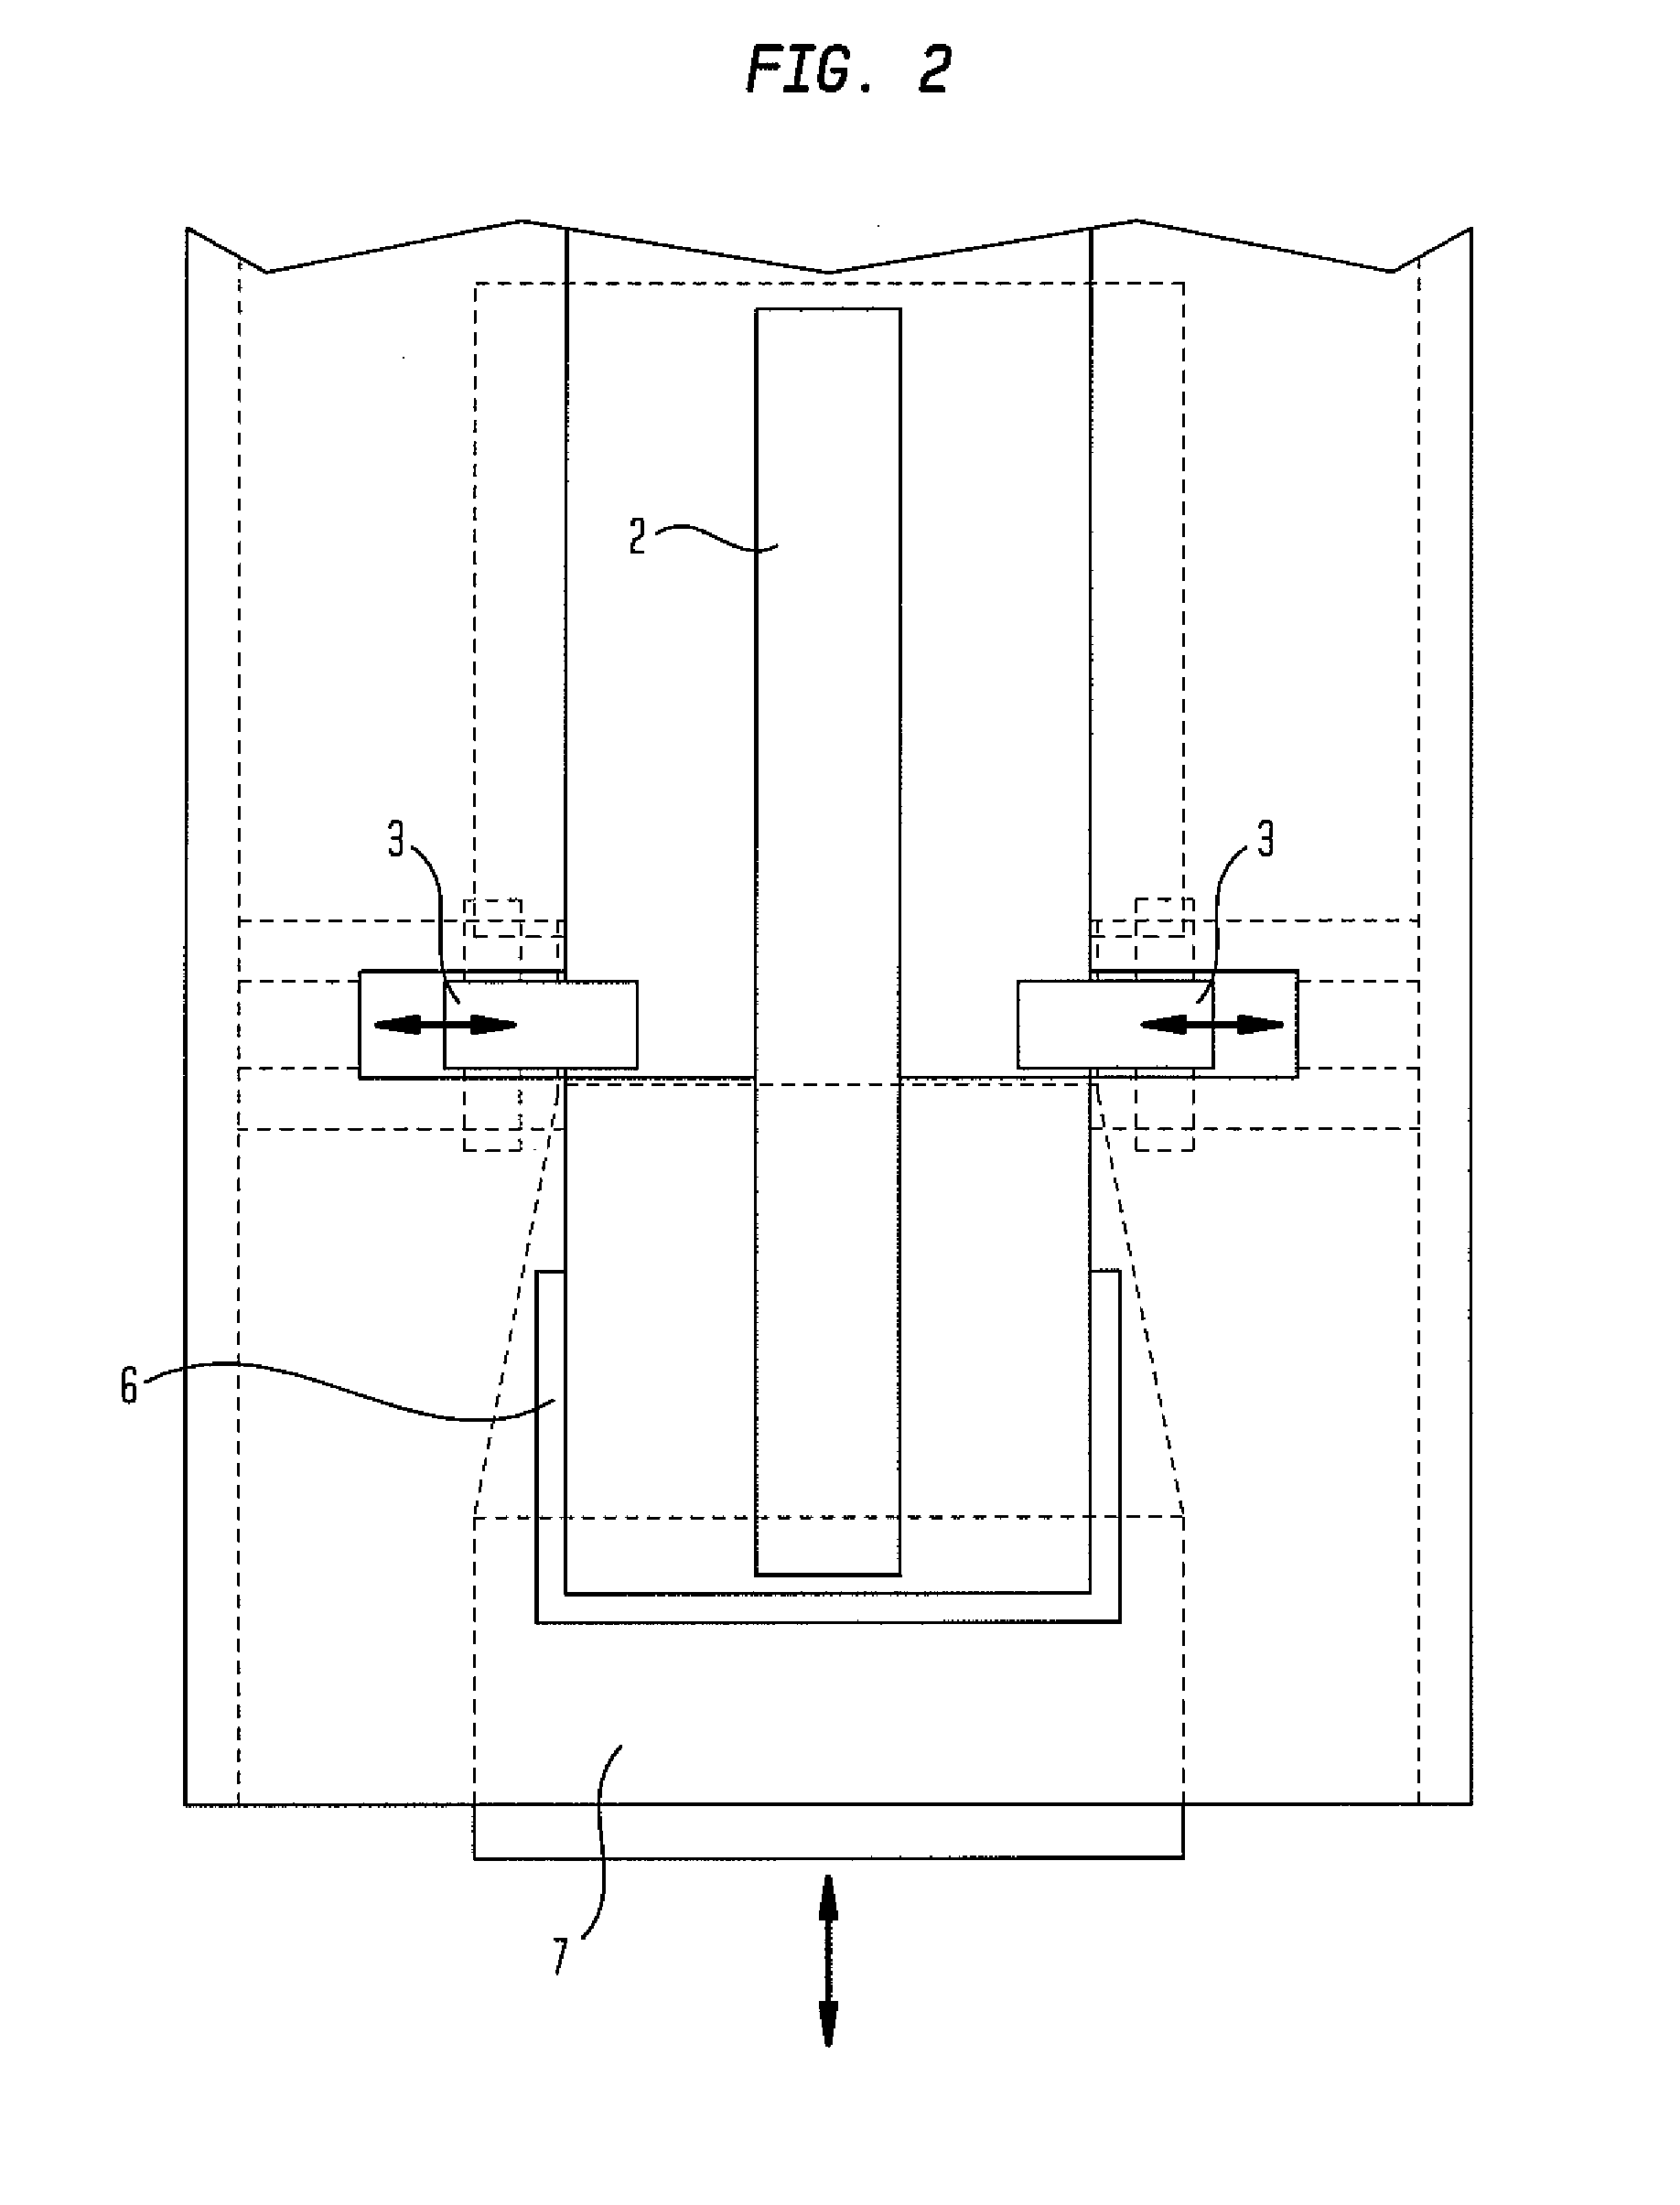 Device and method for locking apparatuses